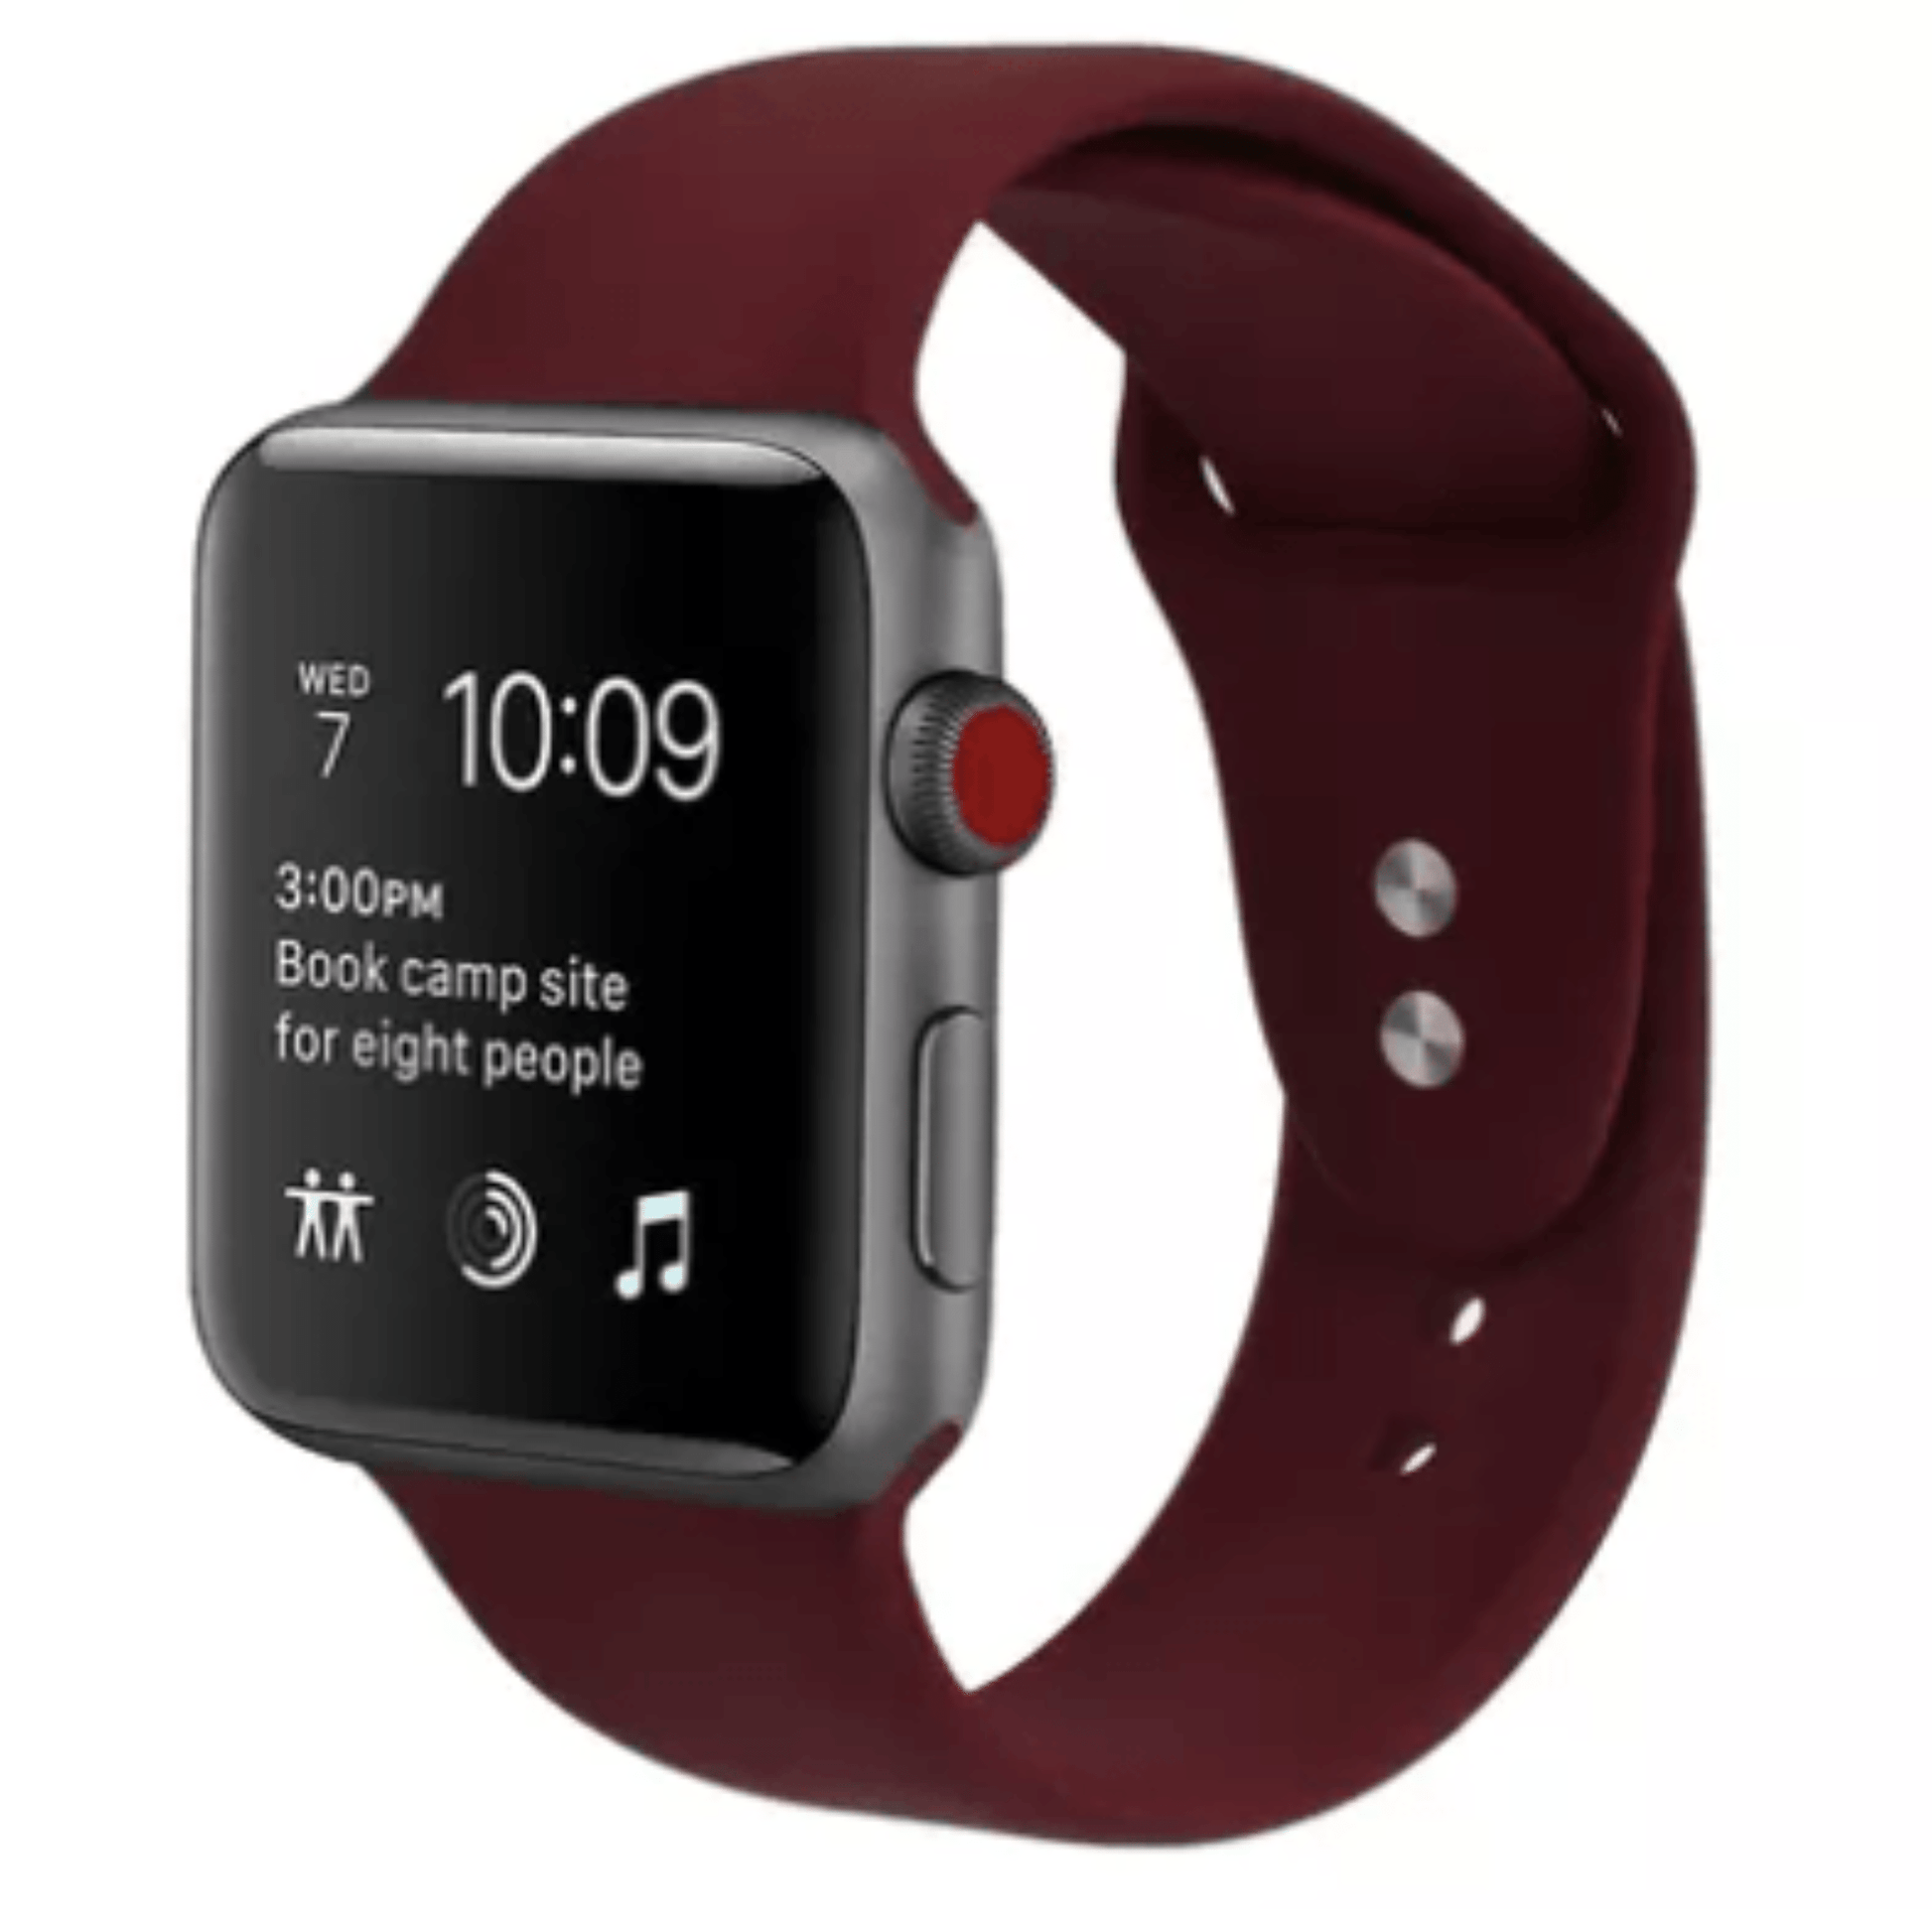 Silicone Sport Replacement Band for Apple Watch Maroon - Plum Apple Watch Band Elements Watches